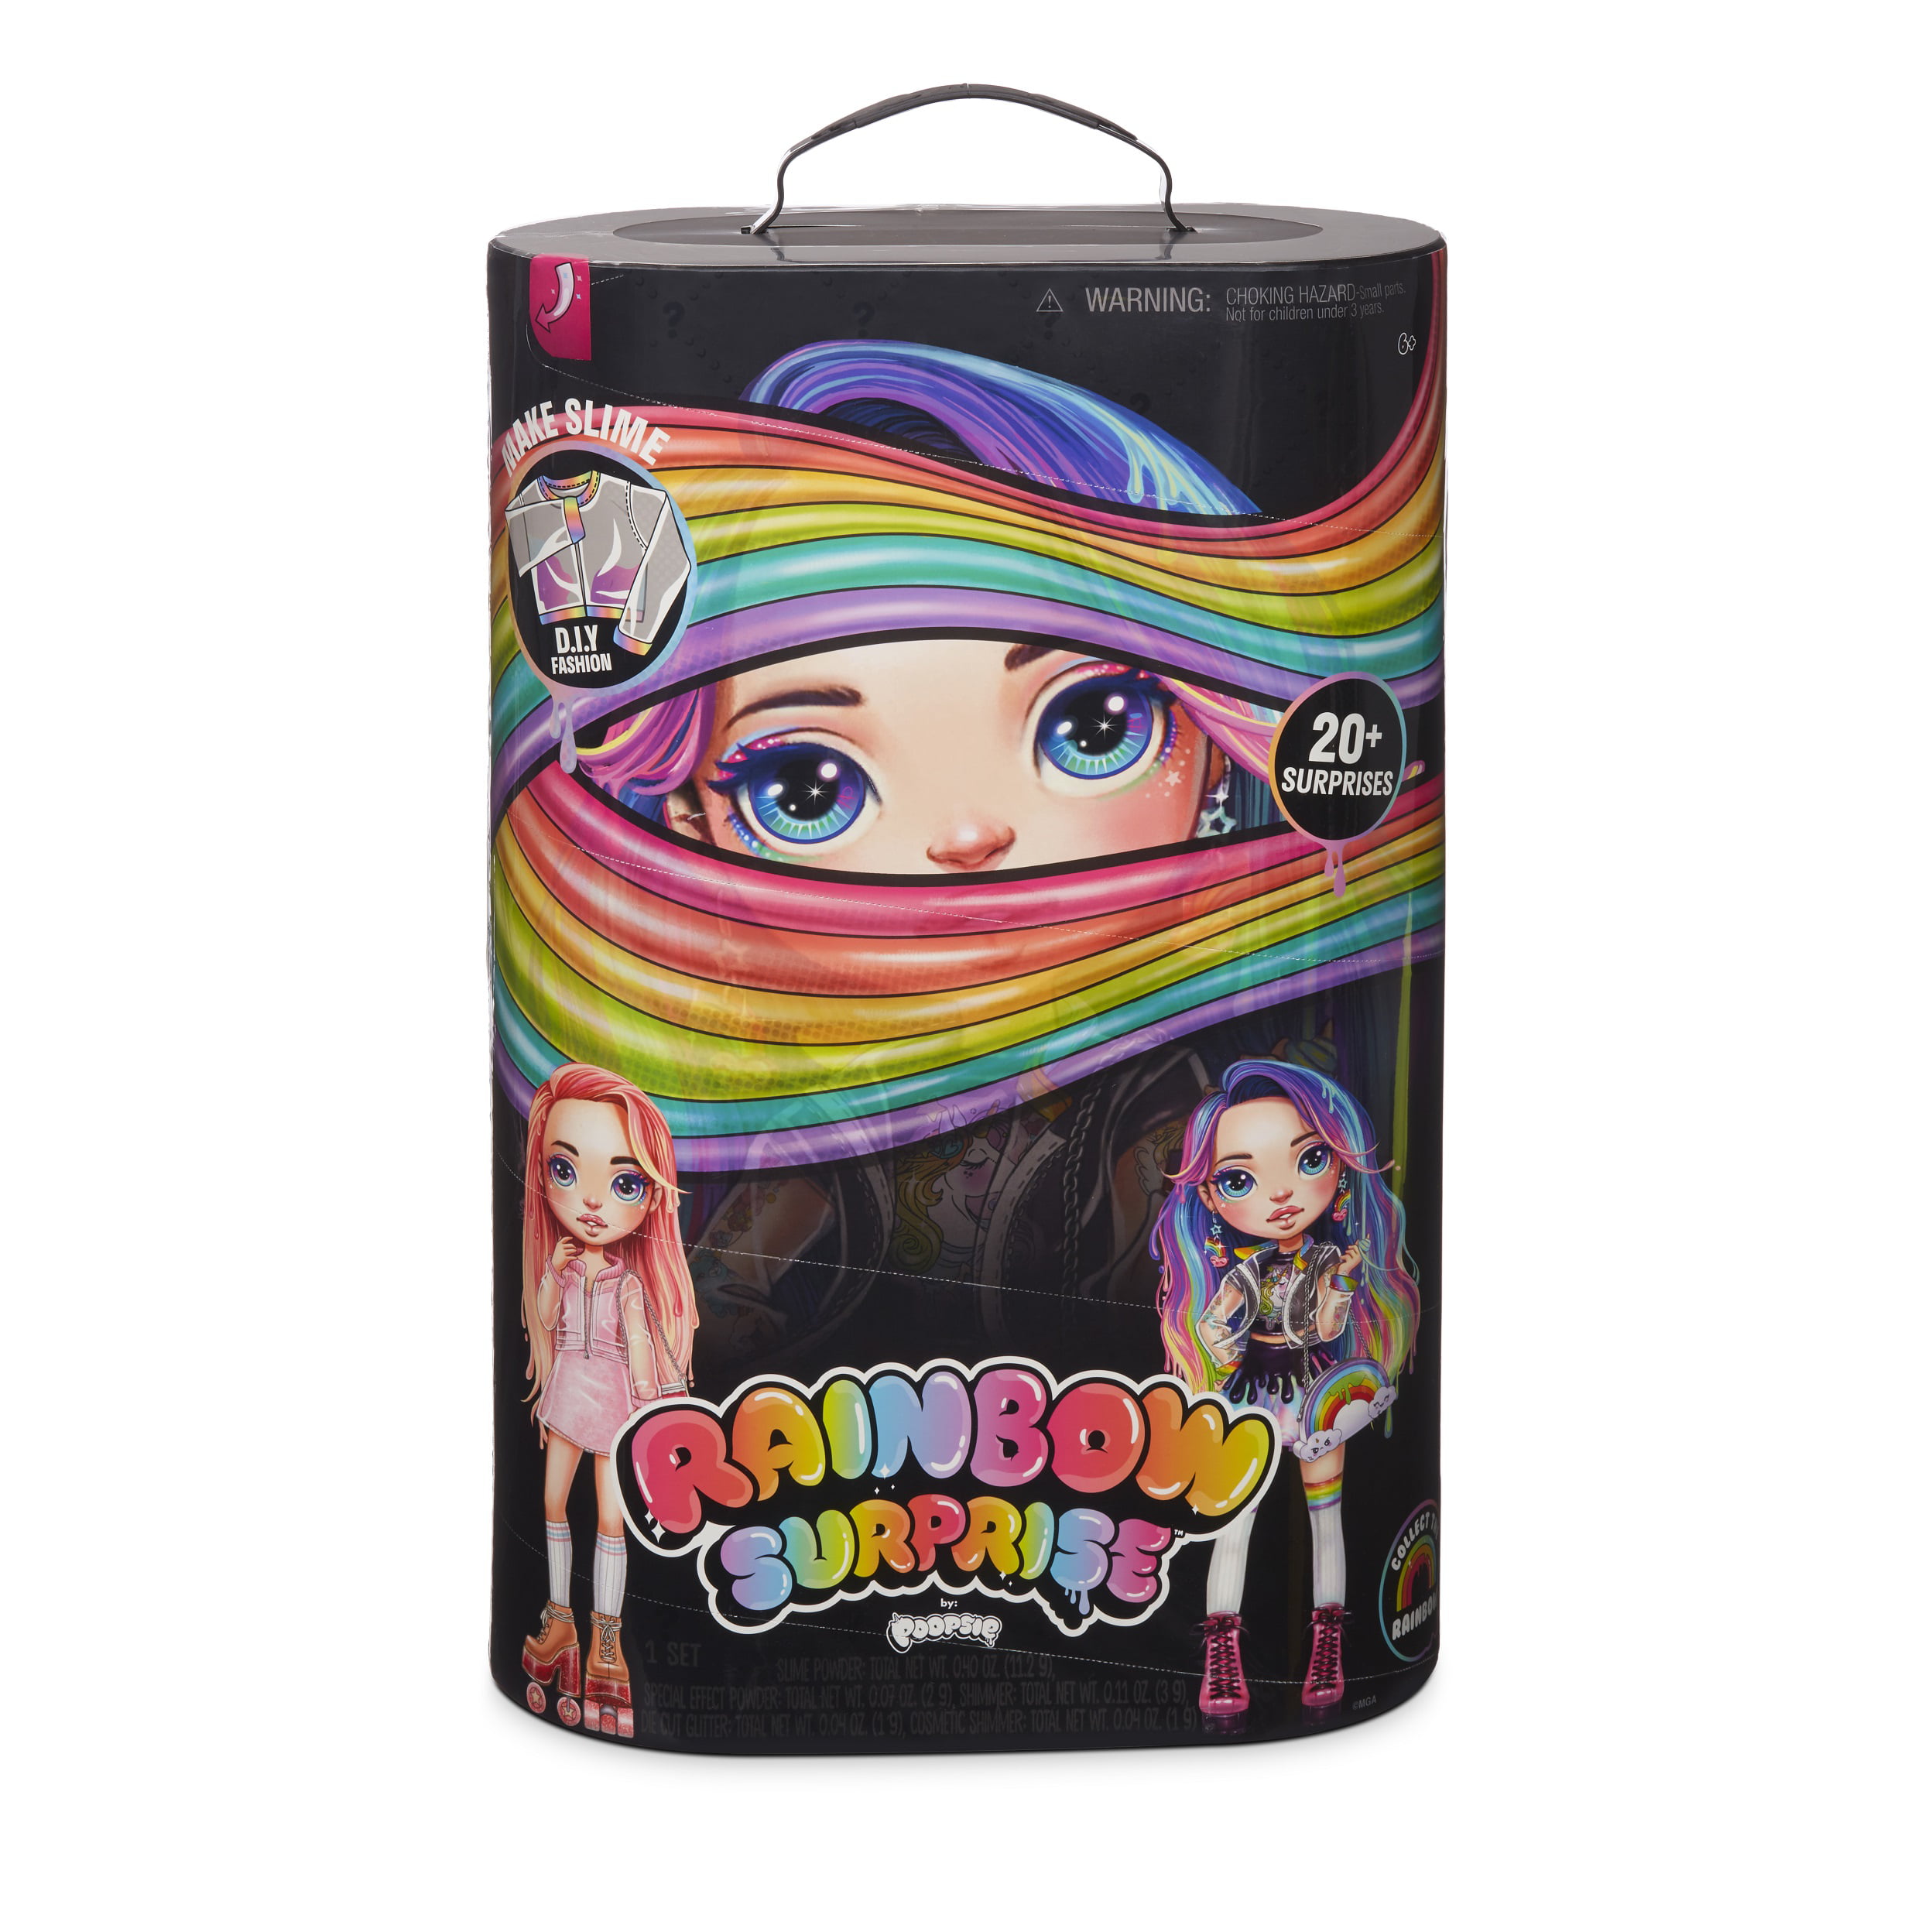 Toyland® 27 Poopsie Slime Surprise Rainbow Brightstar Girl Foil Balloon -  Party Decorations